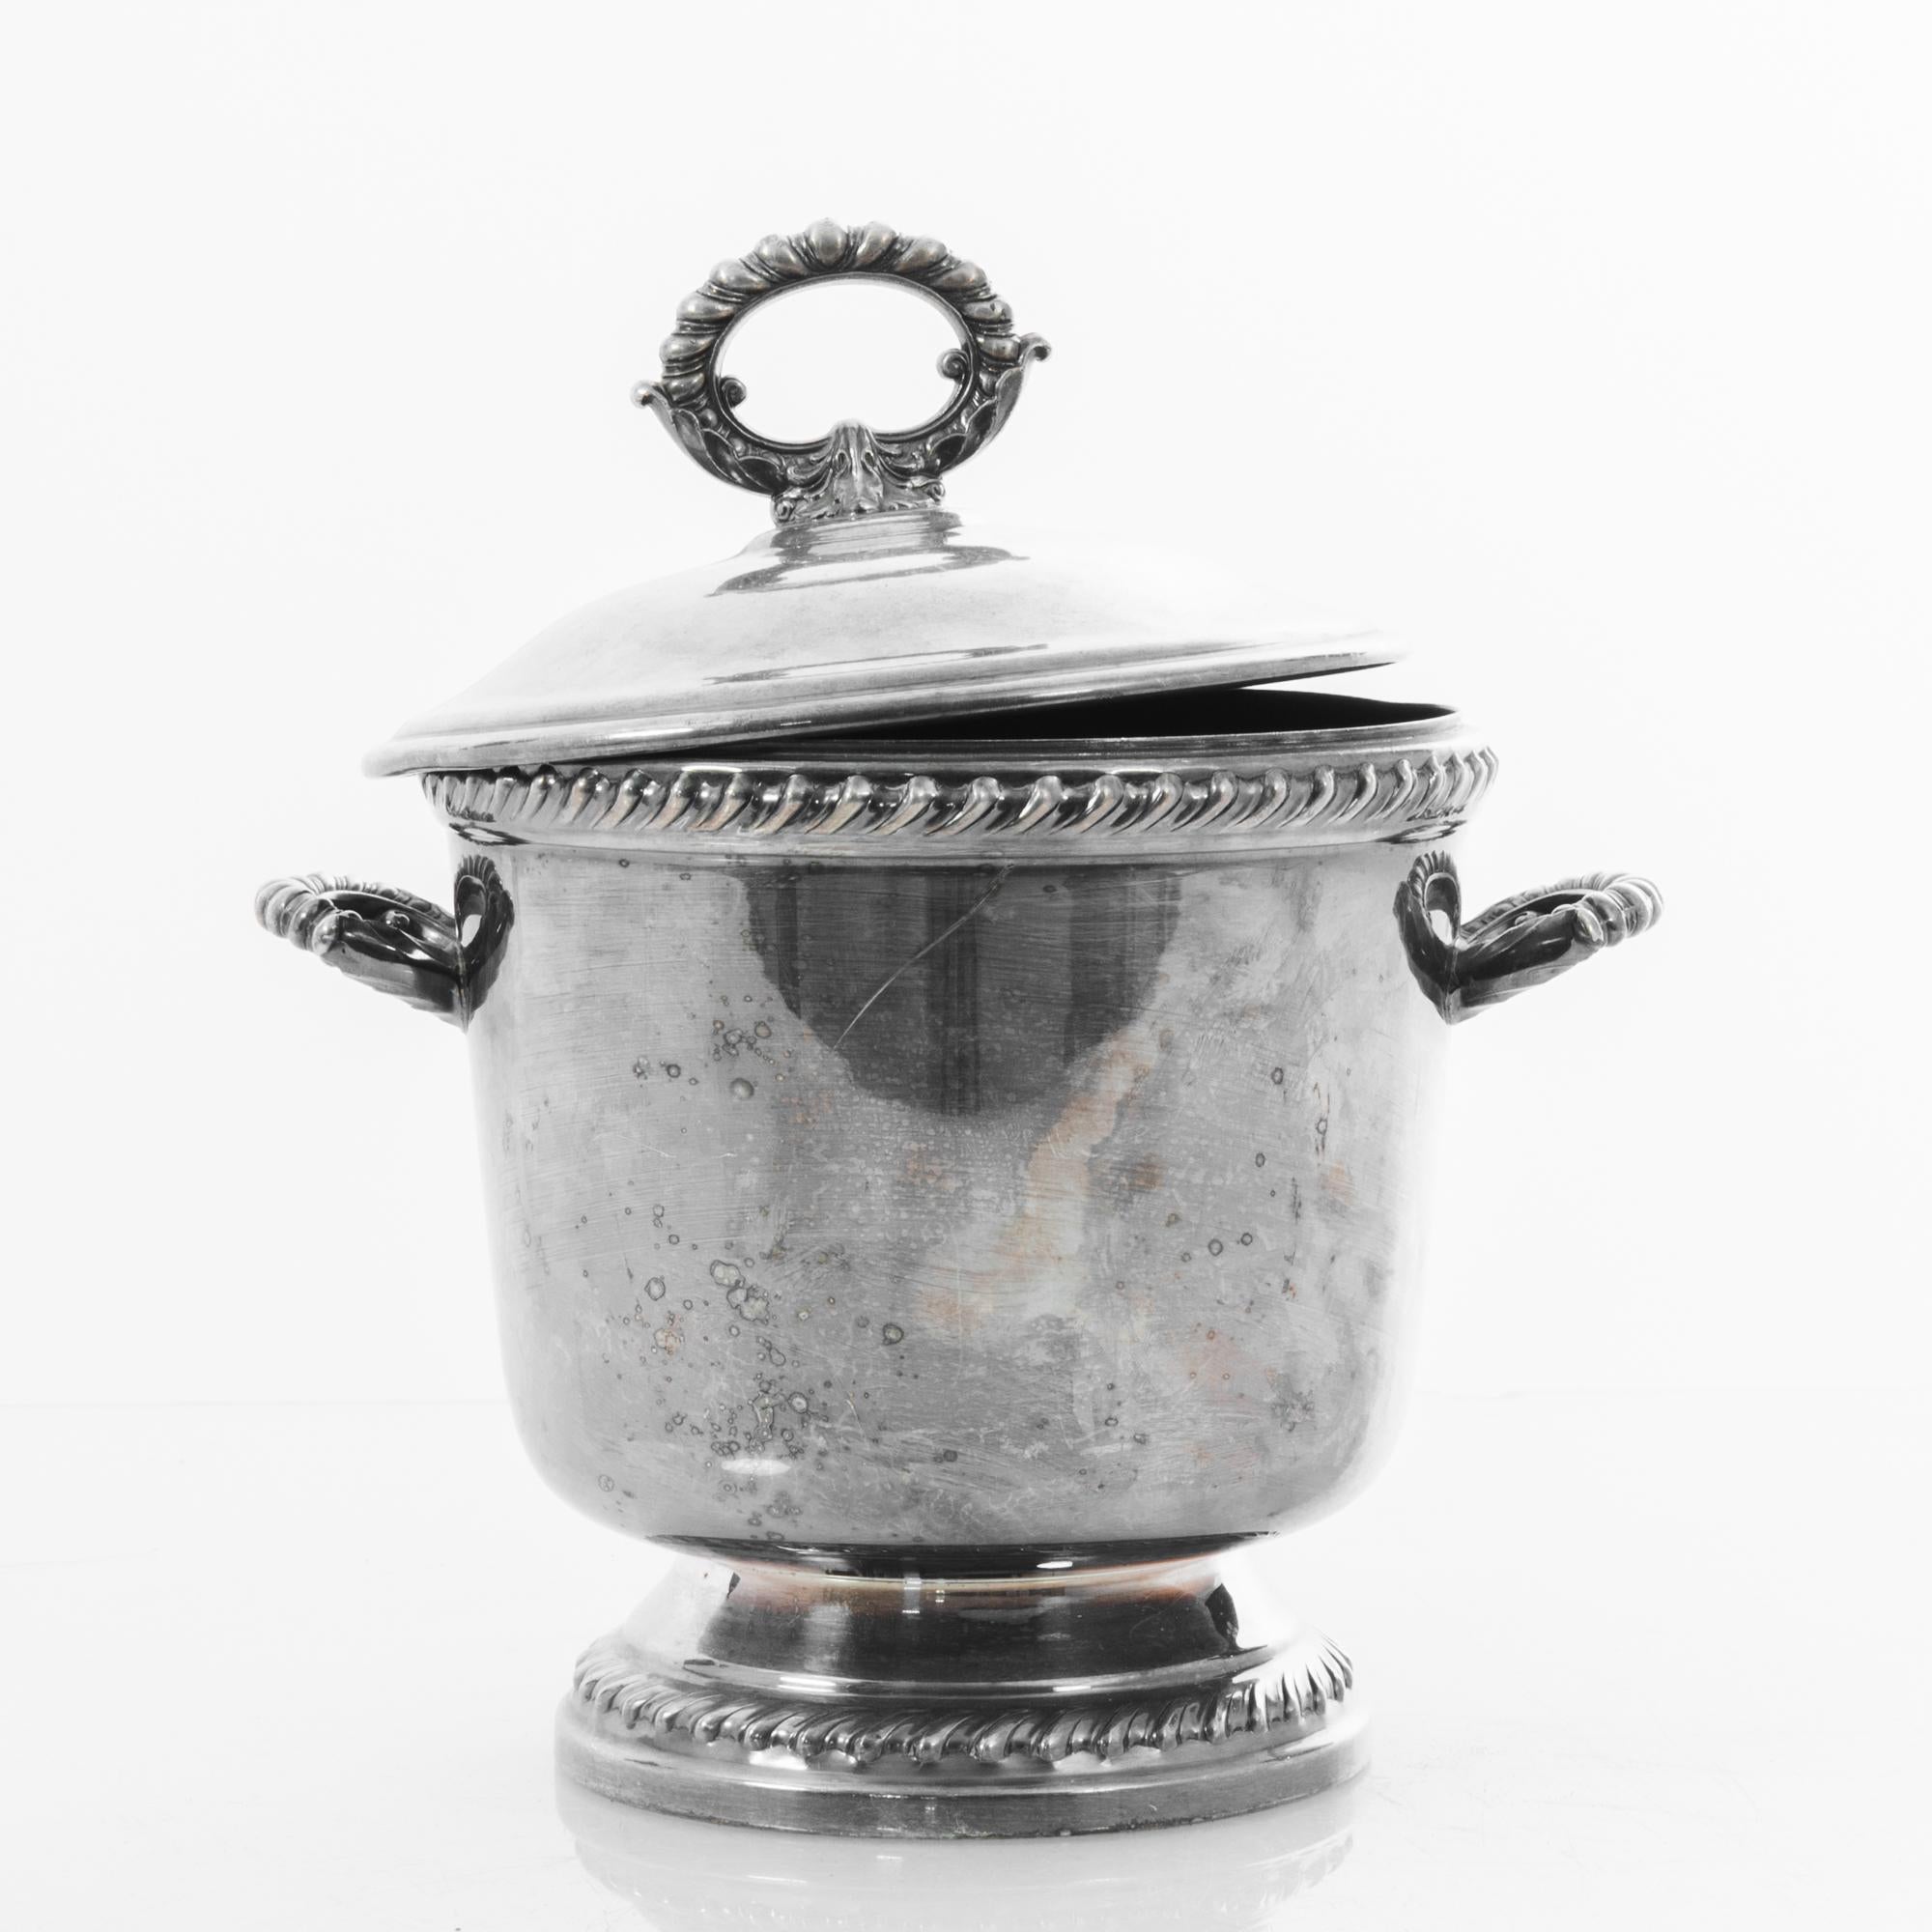 From before the era of refrigeration, this was an essential appliance for every party or quiet evening refreshment. With a beautiful aged finish and distinctive ornamental shape characteristic of turn of the century silversmiths. This functional